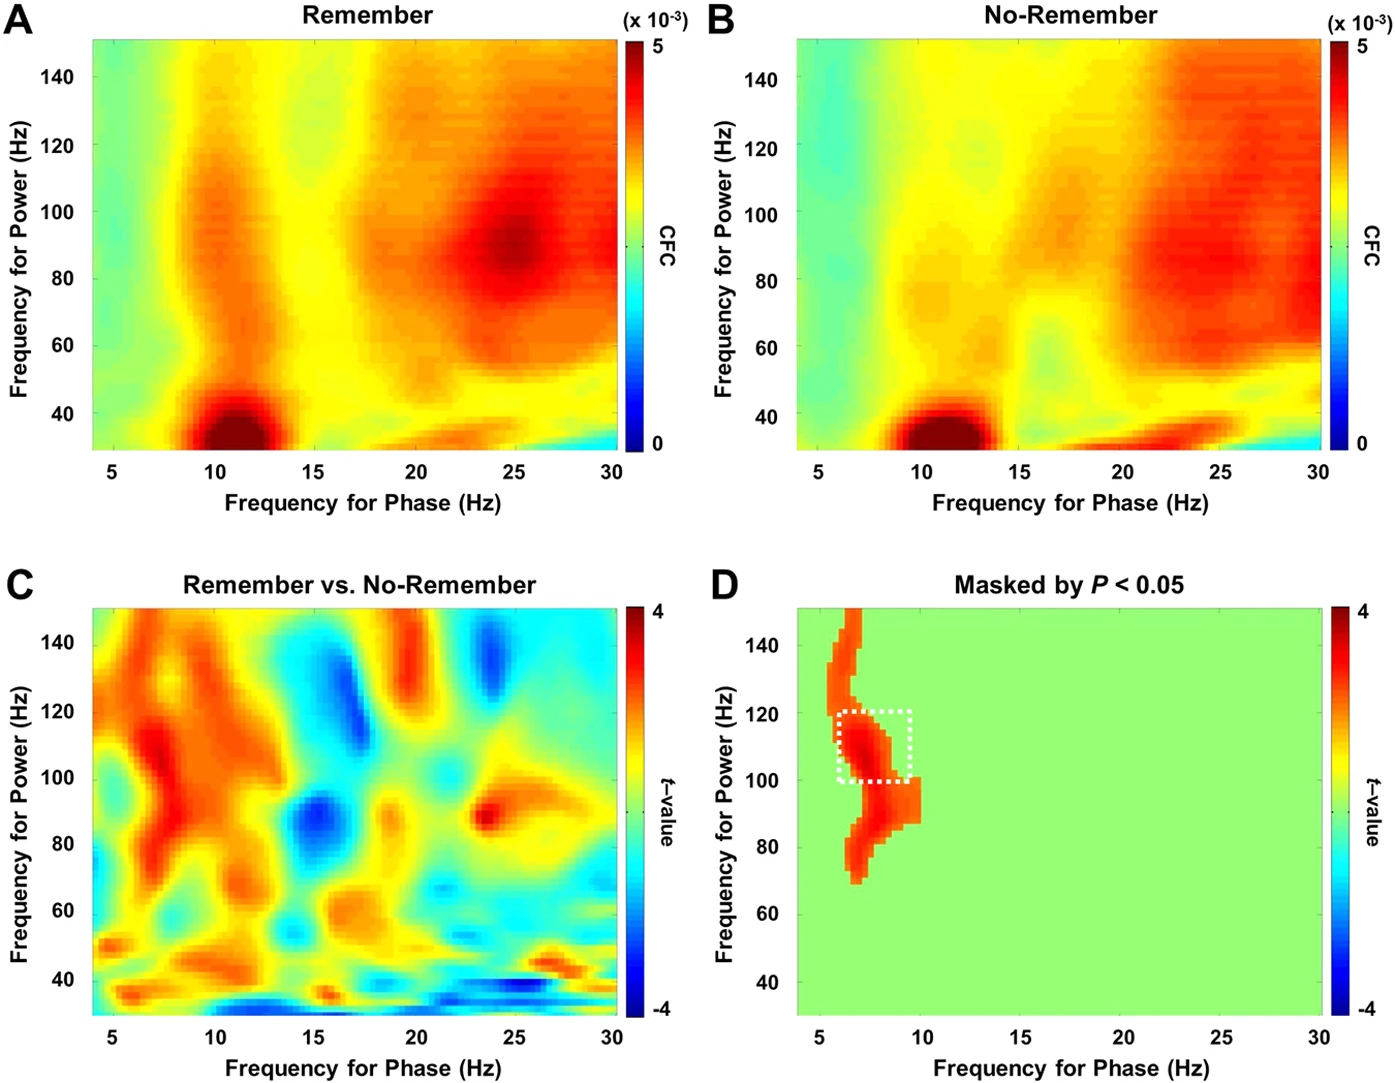 Formation of visual memories controlled by gamma power phase-locked to alpha oscillations